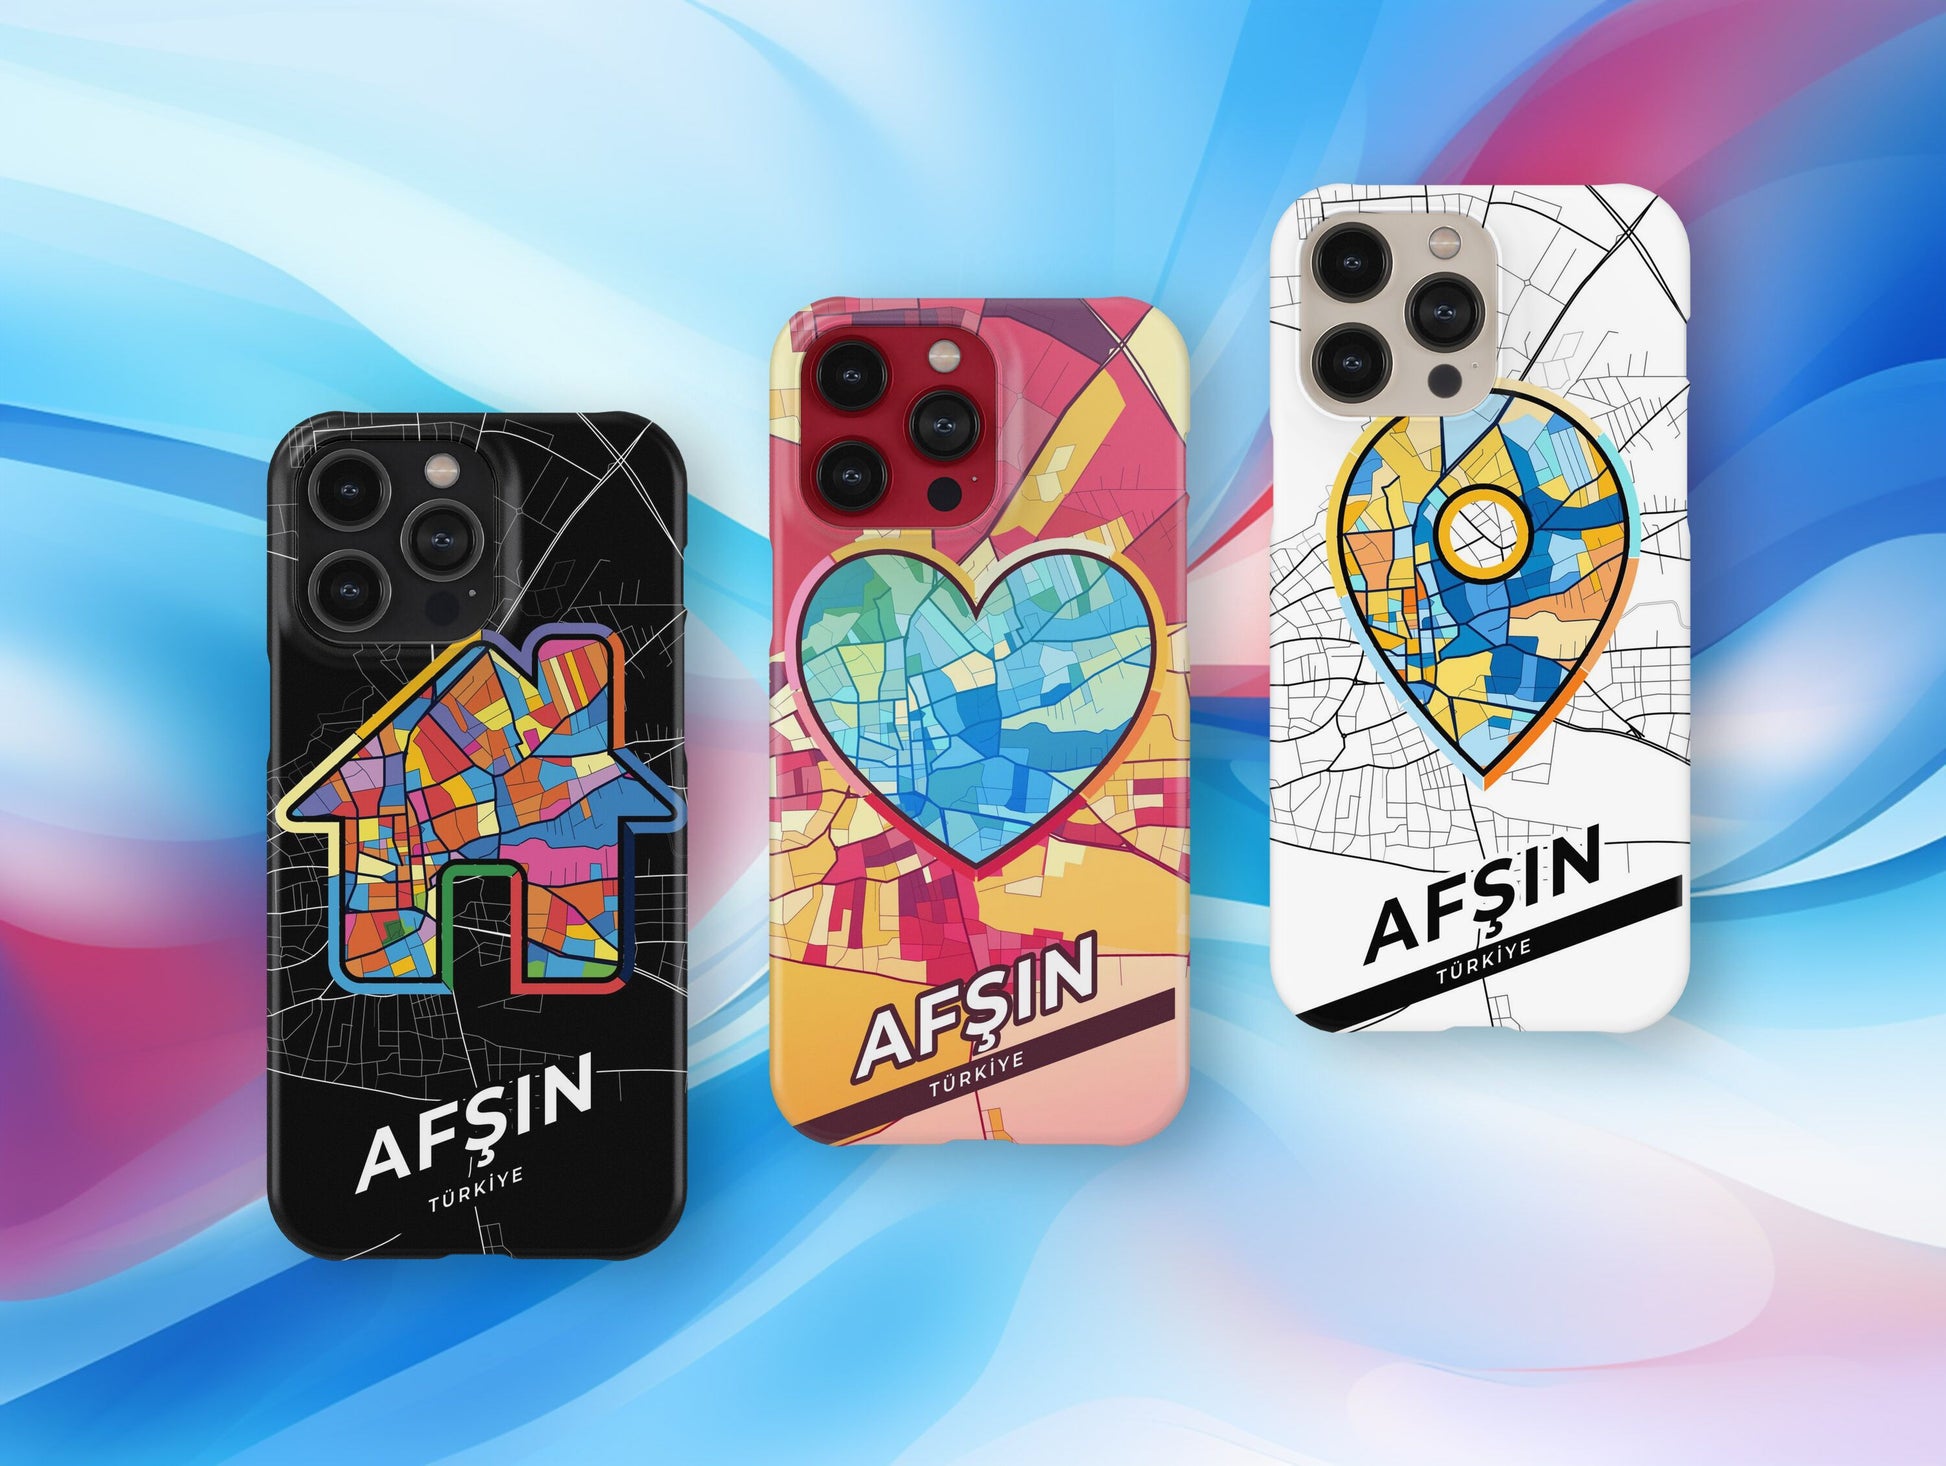 Afşin Turkey slim phone case with colorful icon. Birthday, wedding or housewarming gift. Couple match cases.